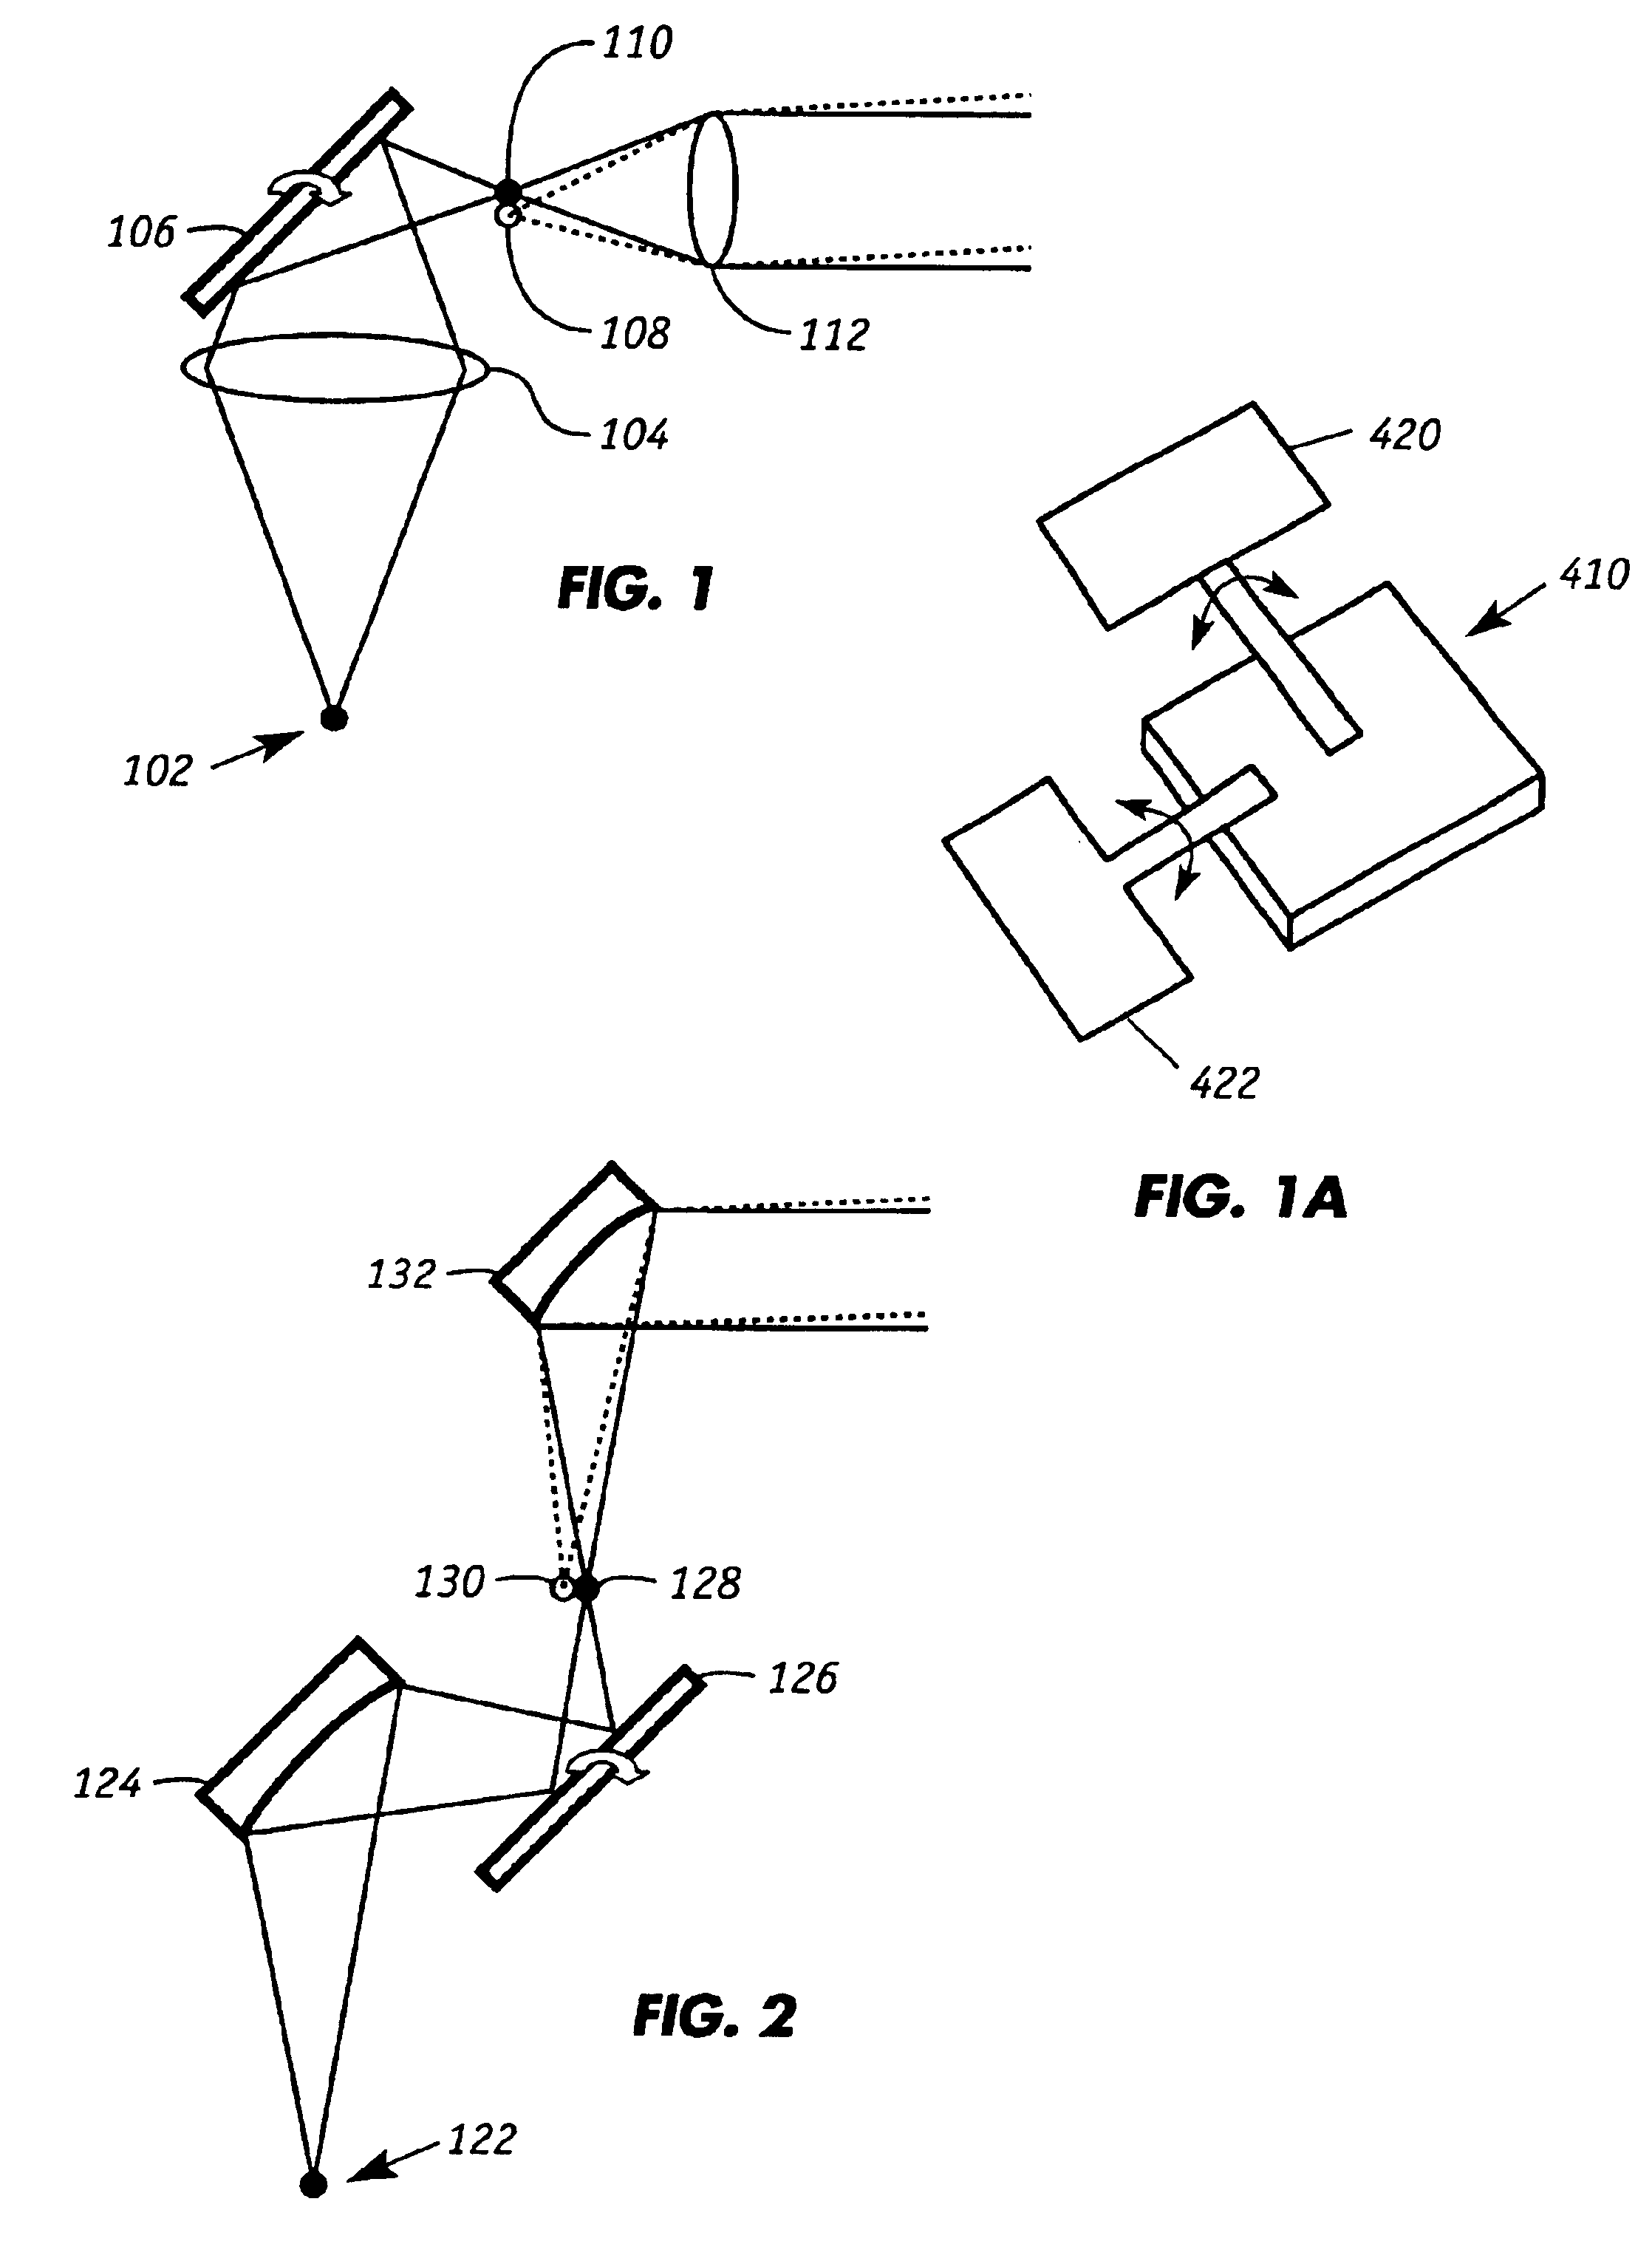 Apparatus for generating partially coherent radiation